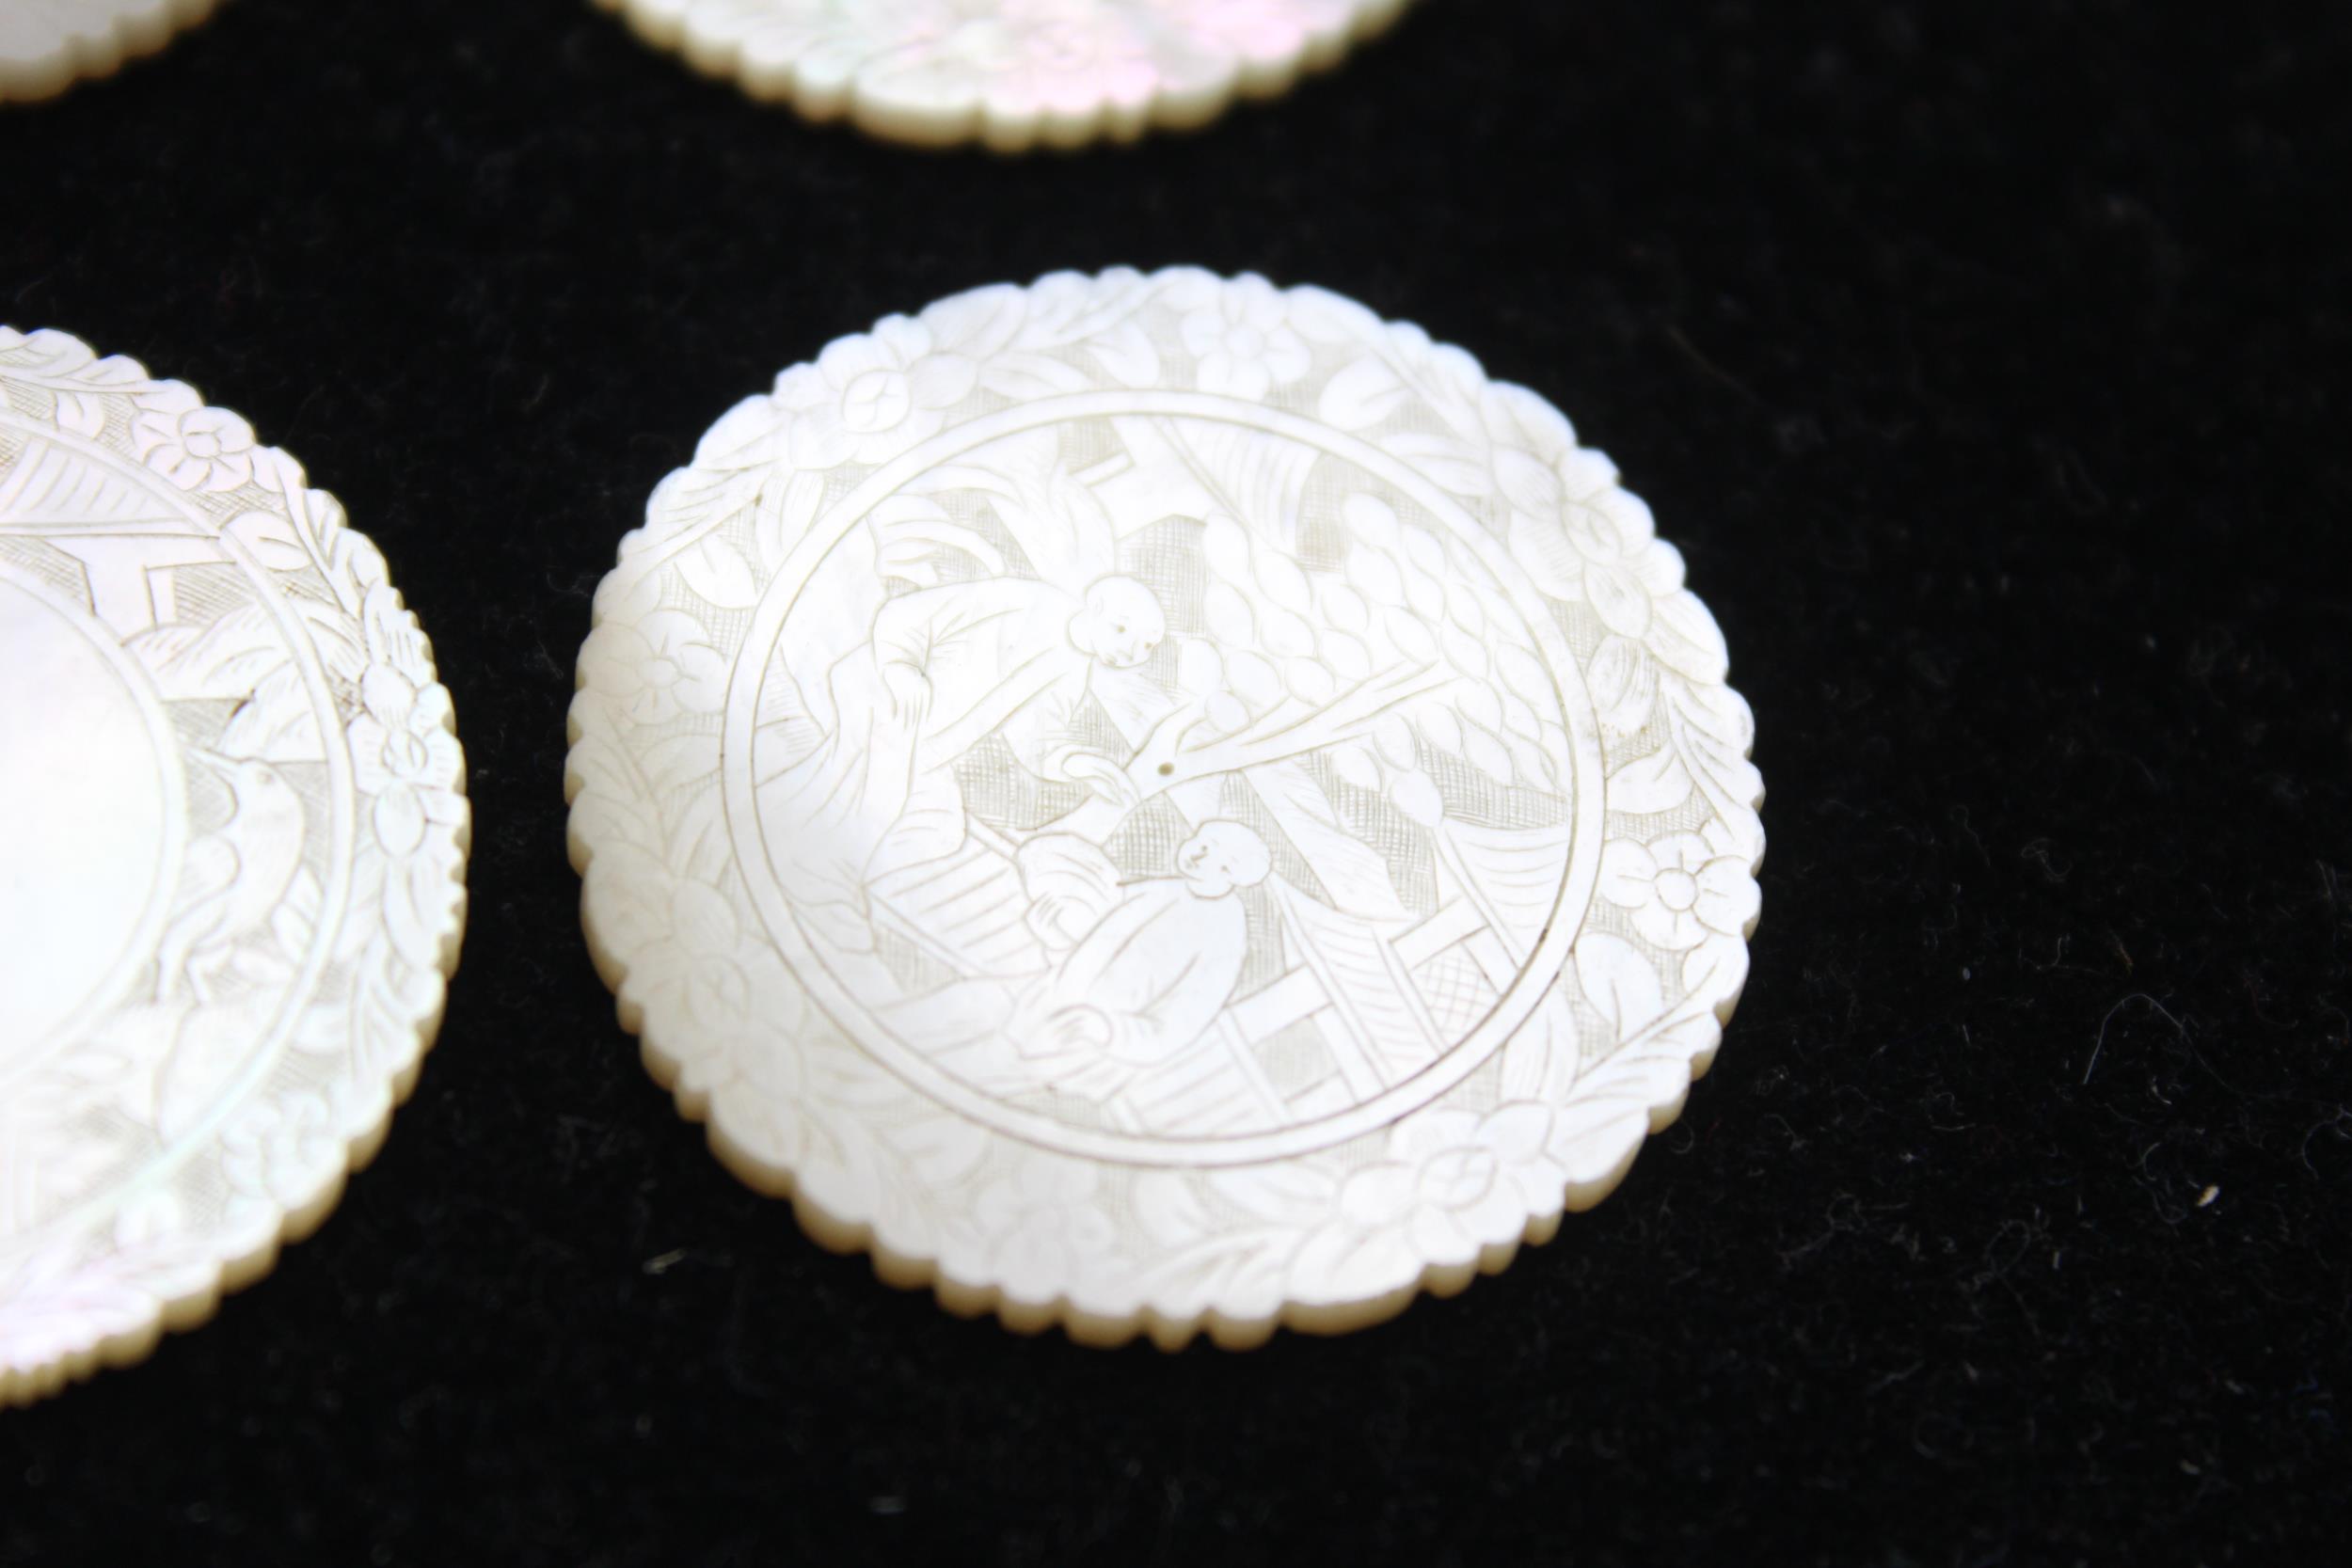 10 x Antique Chinese Mother Of Pearl Circular Gaming TOKENS / CHIPS // Approx Diameter - 3cm In - Image 7 of 7